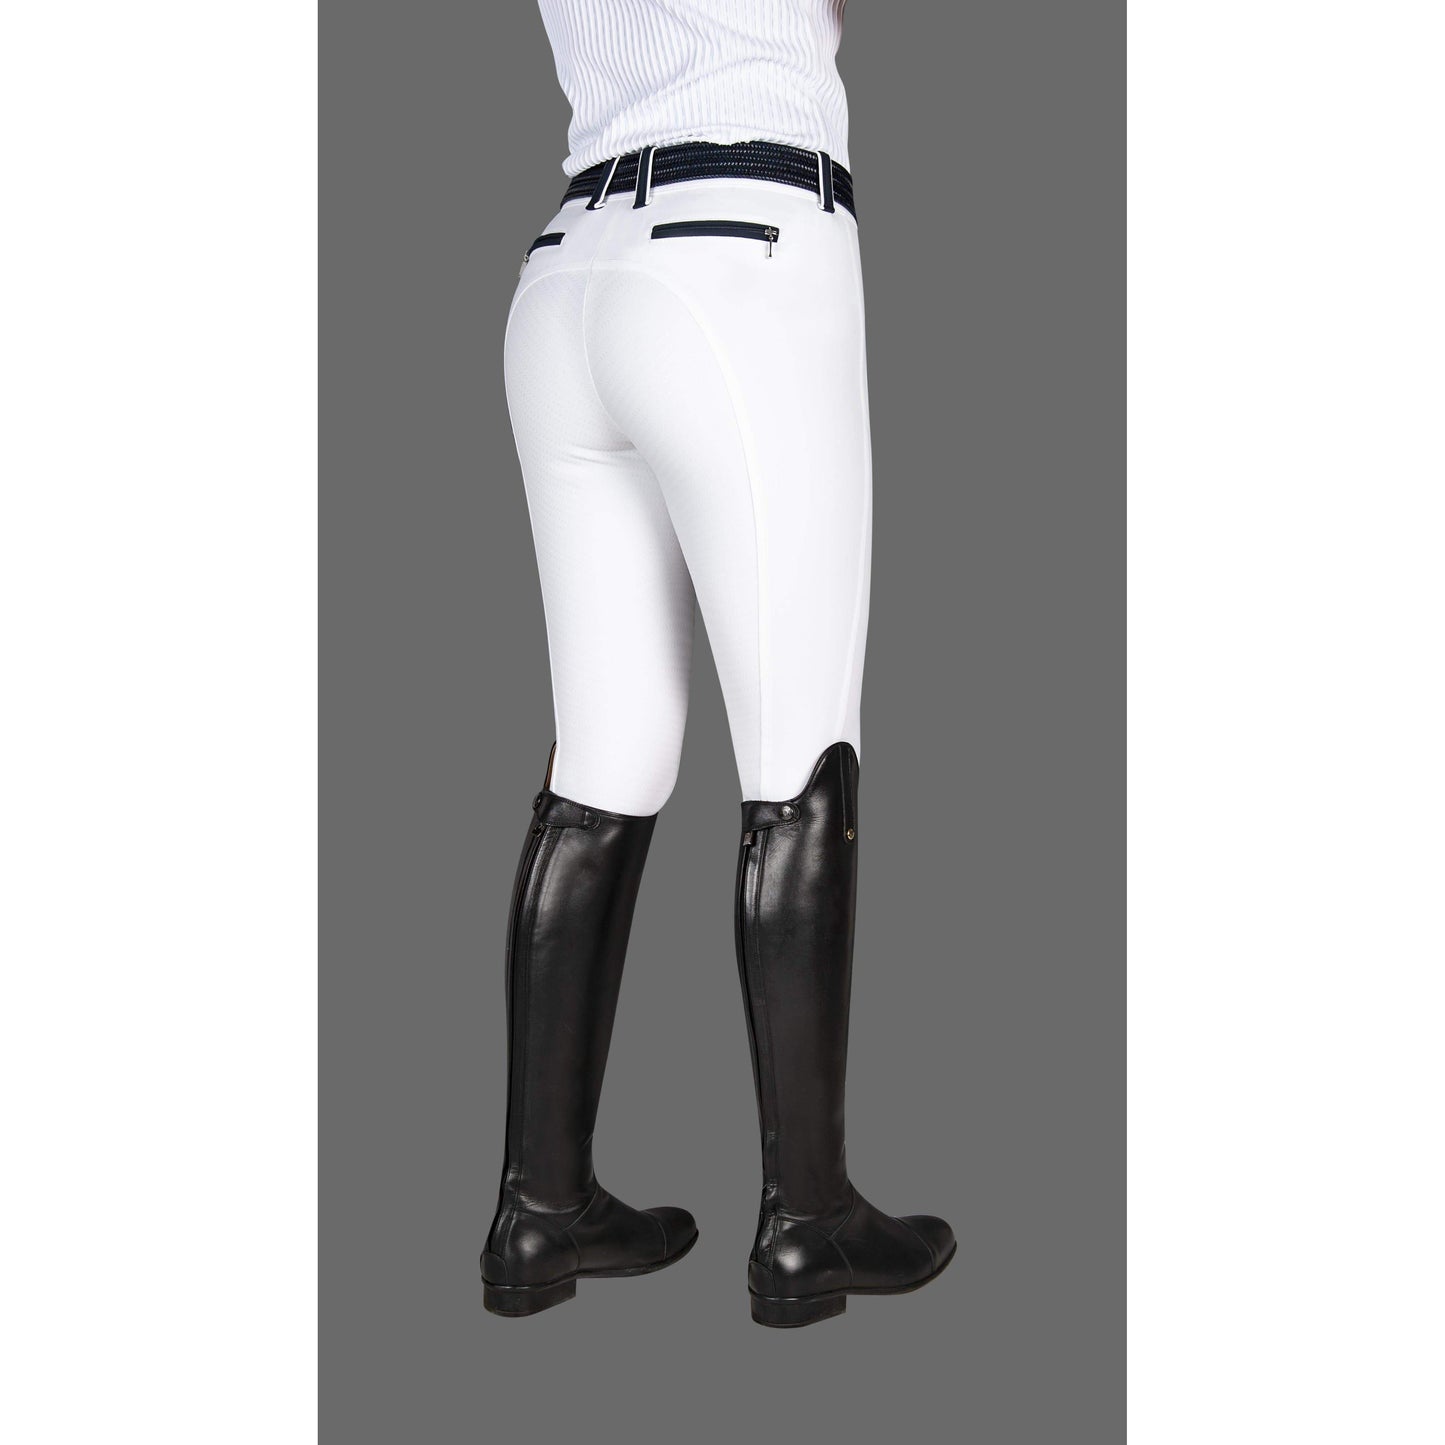 Equiline Angy Ladies Full Seat Breeches-Dapple EQ-The Equestrian